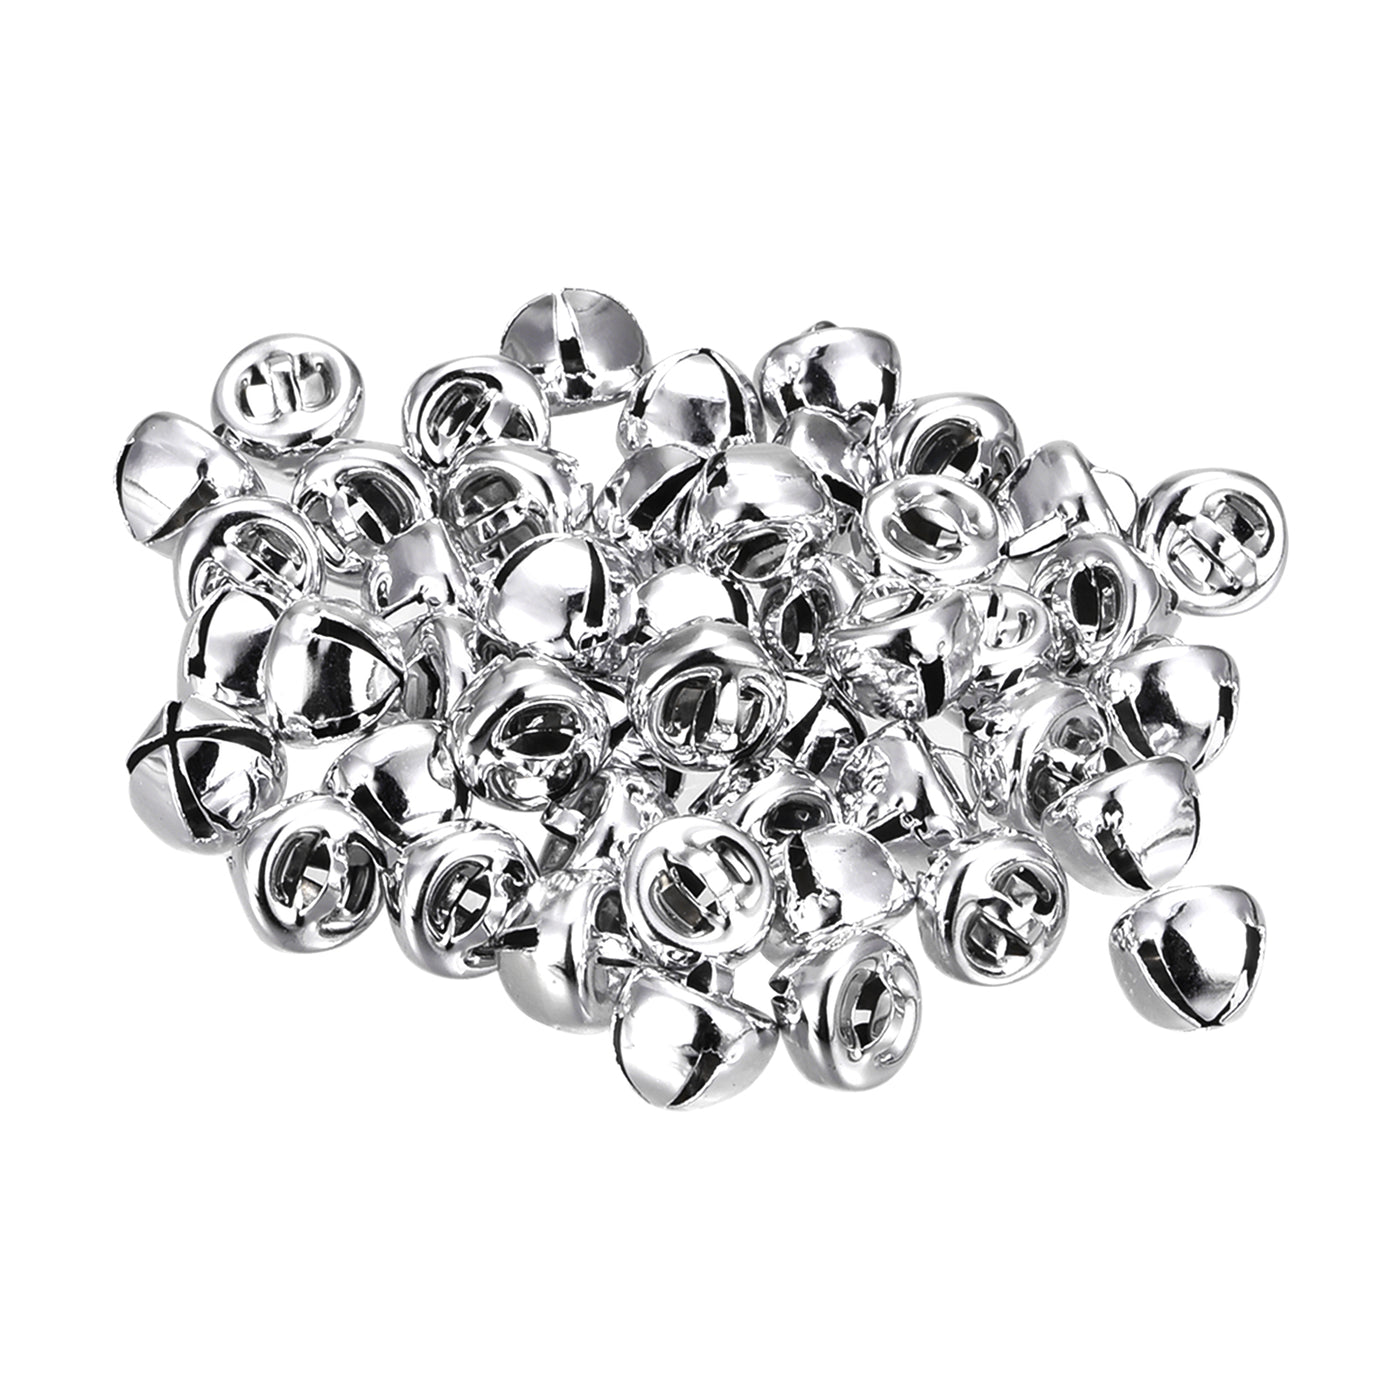 Uxcell Uxcell Jingle Bells, 10mm 80pcs Carbon Steel Craft Bells for DIY Christmas, Red